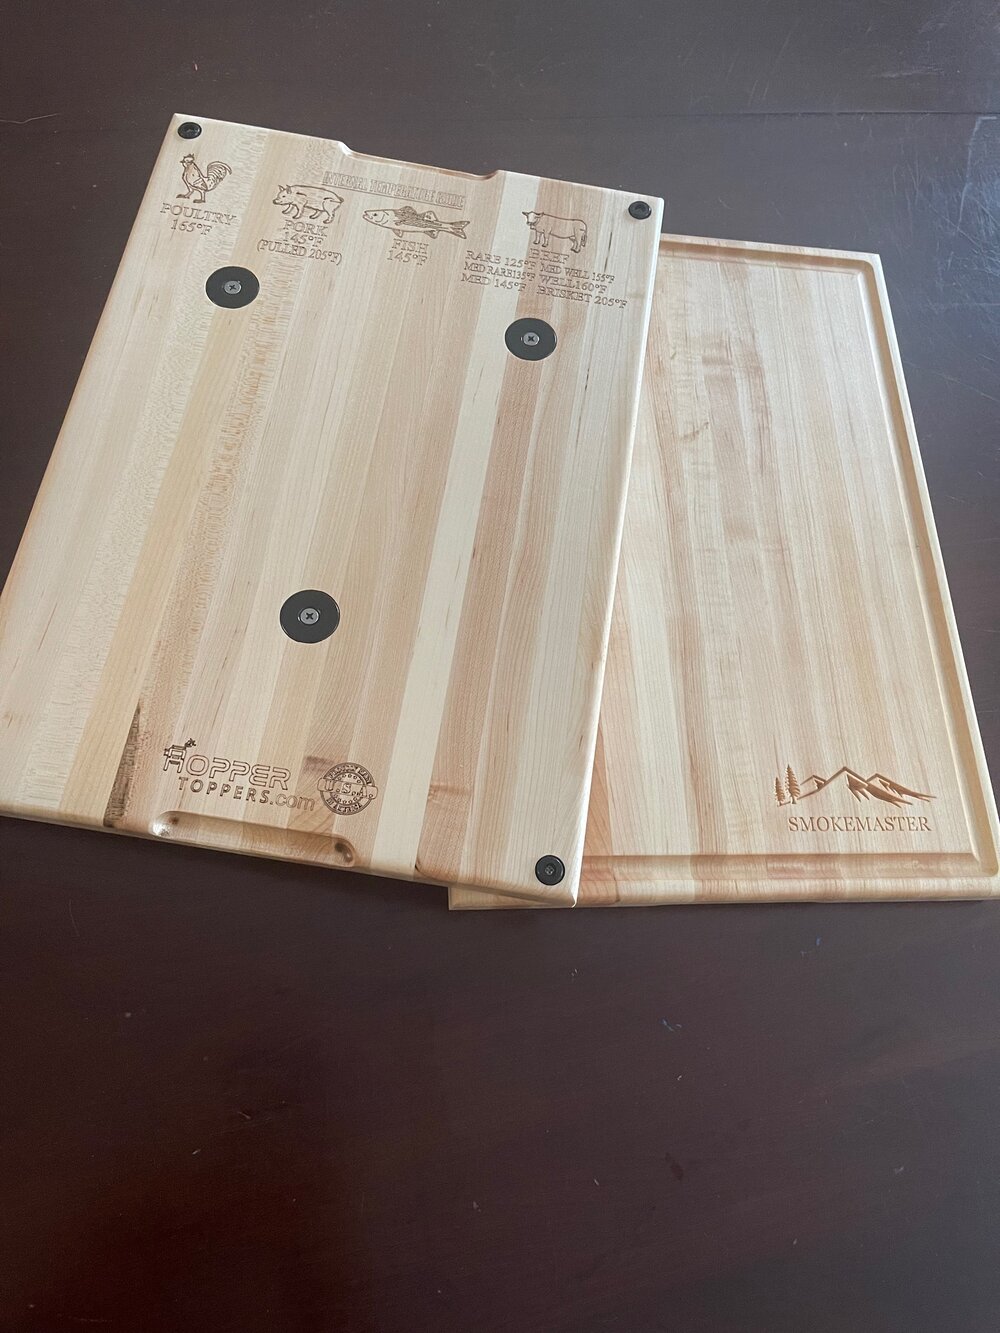 Universal — Pellet grill cutting boards with magnets